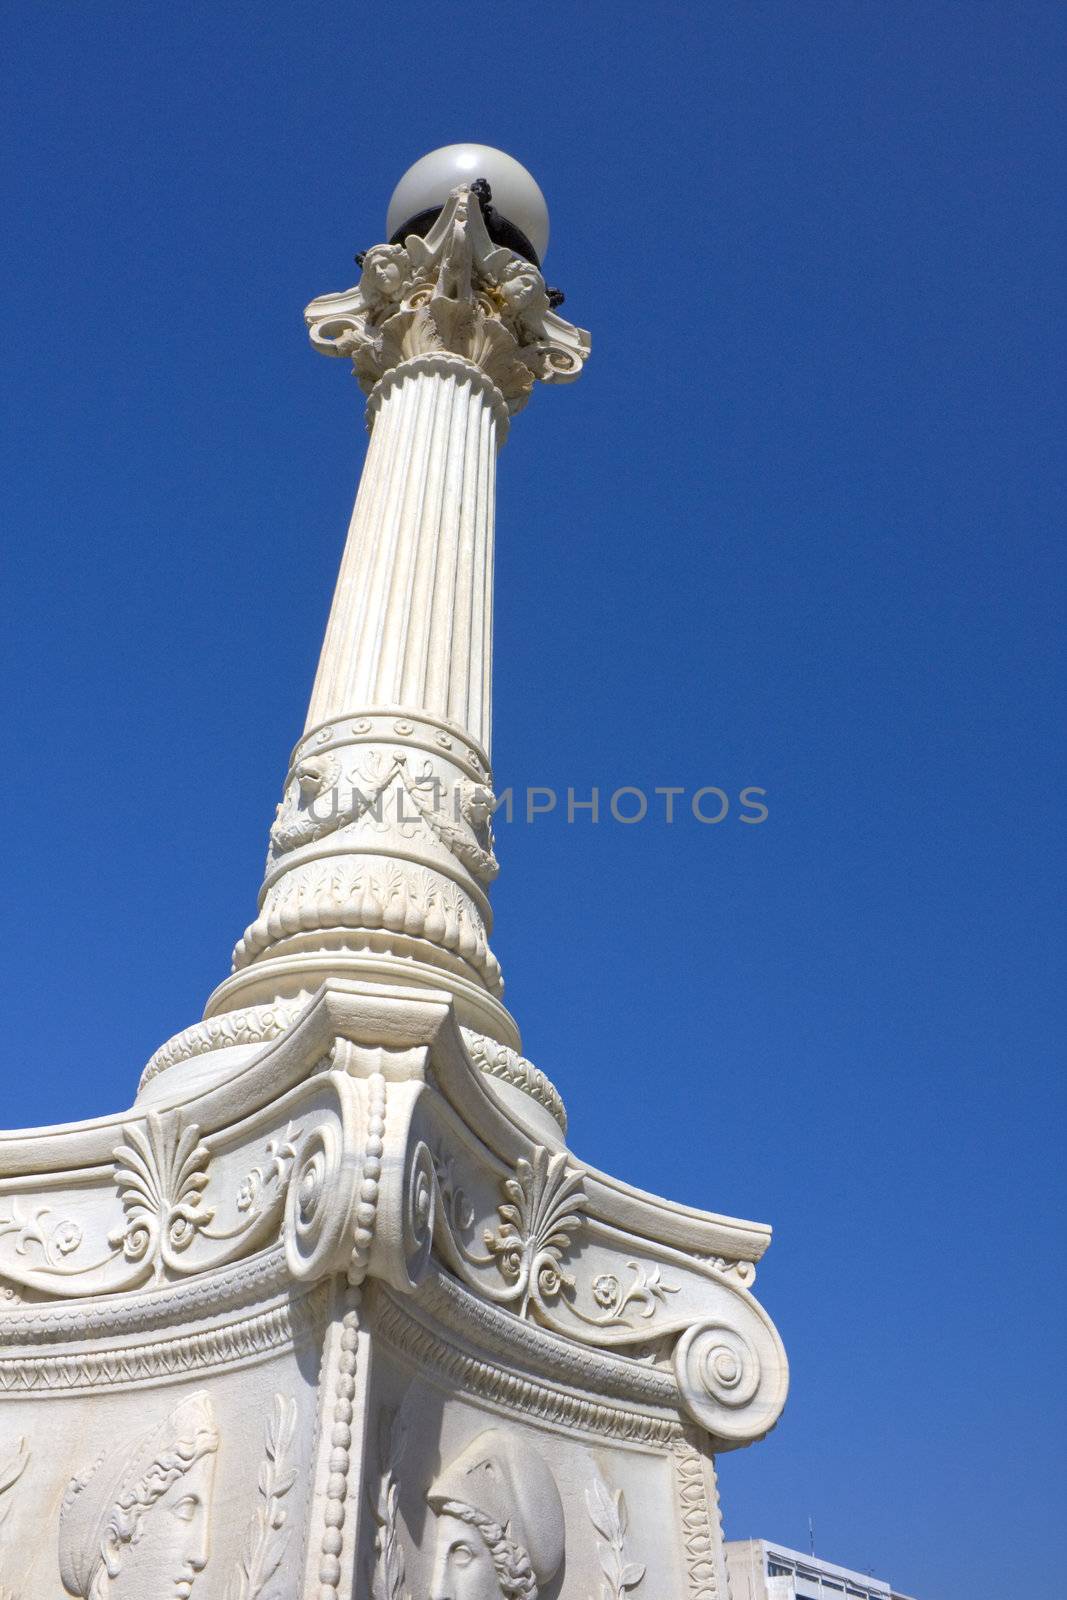 Image of a column light at the ancient University of Athens, Greece.